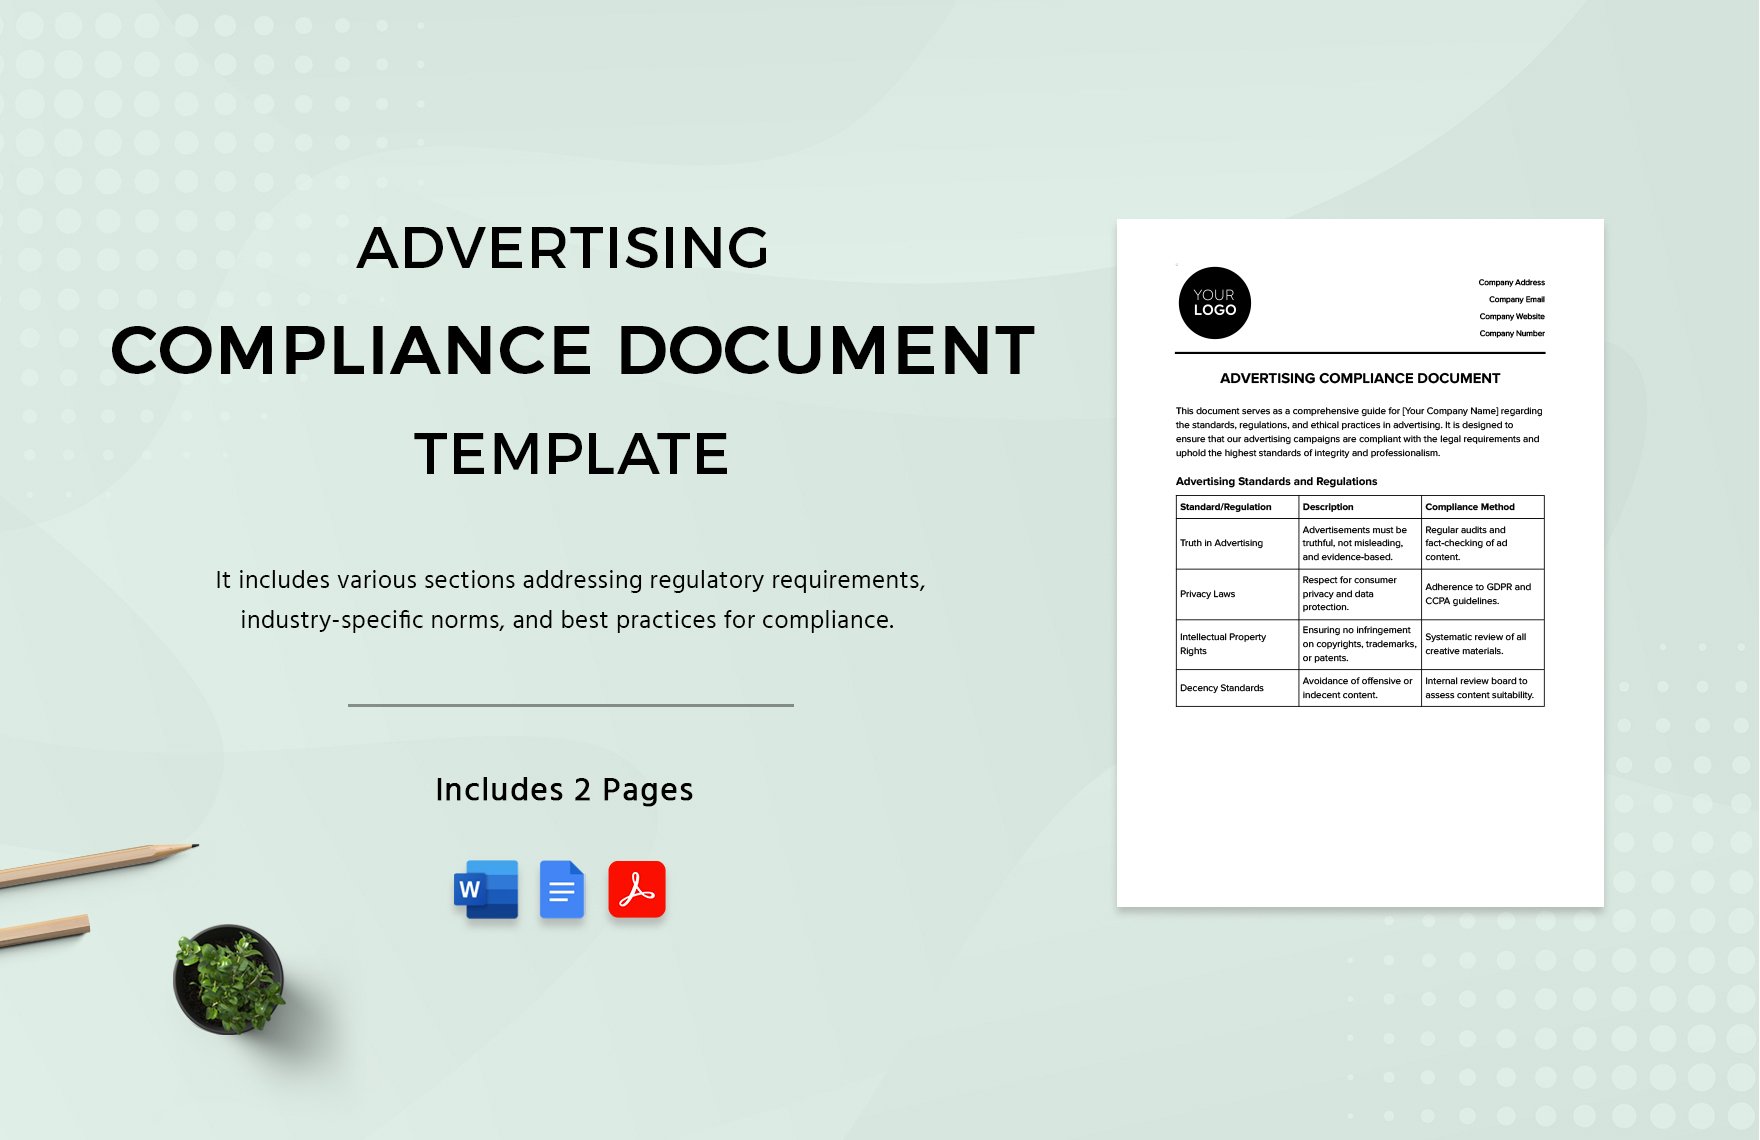 Advertising Compliance Document Template in Word, Google Docs, PDF